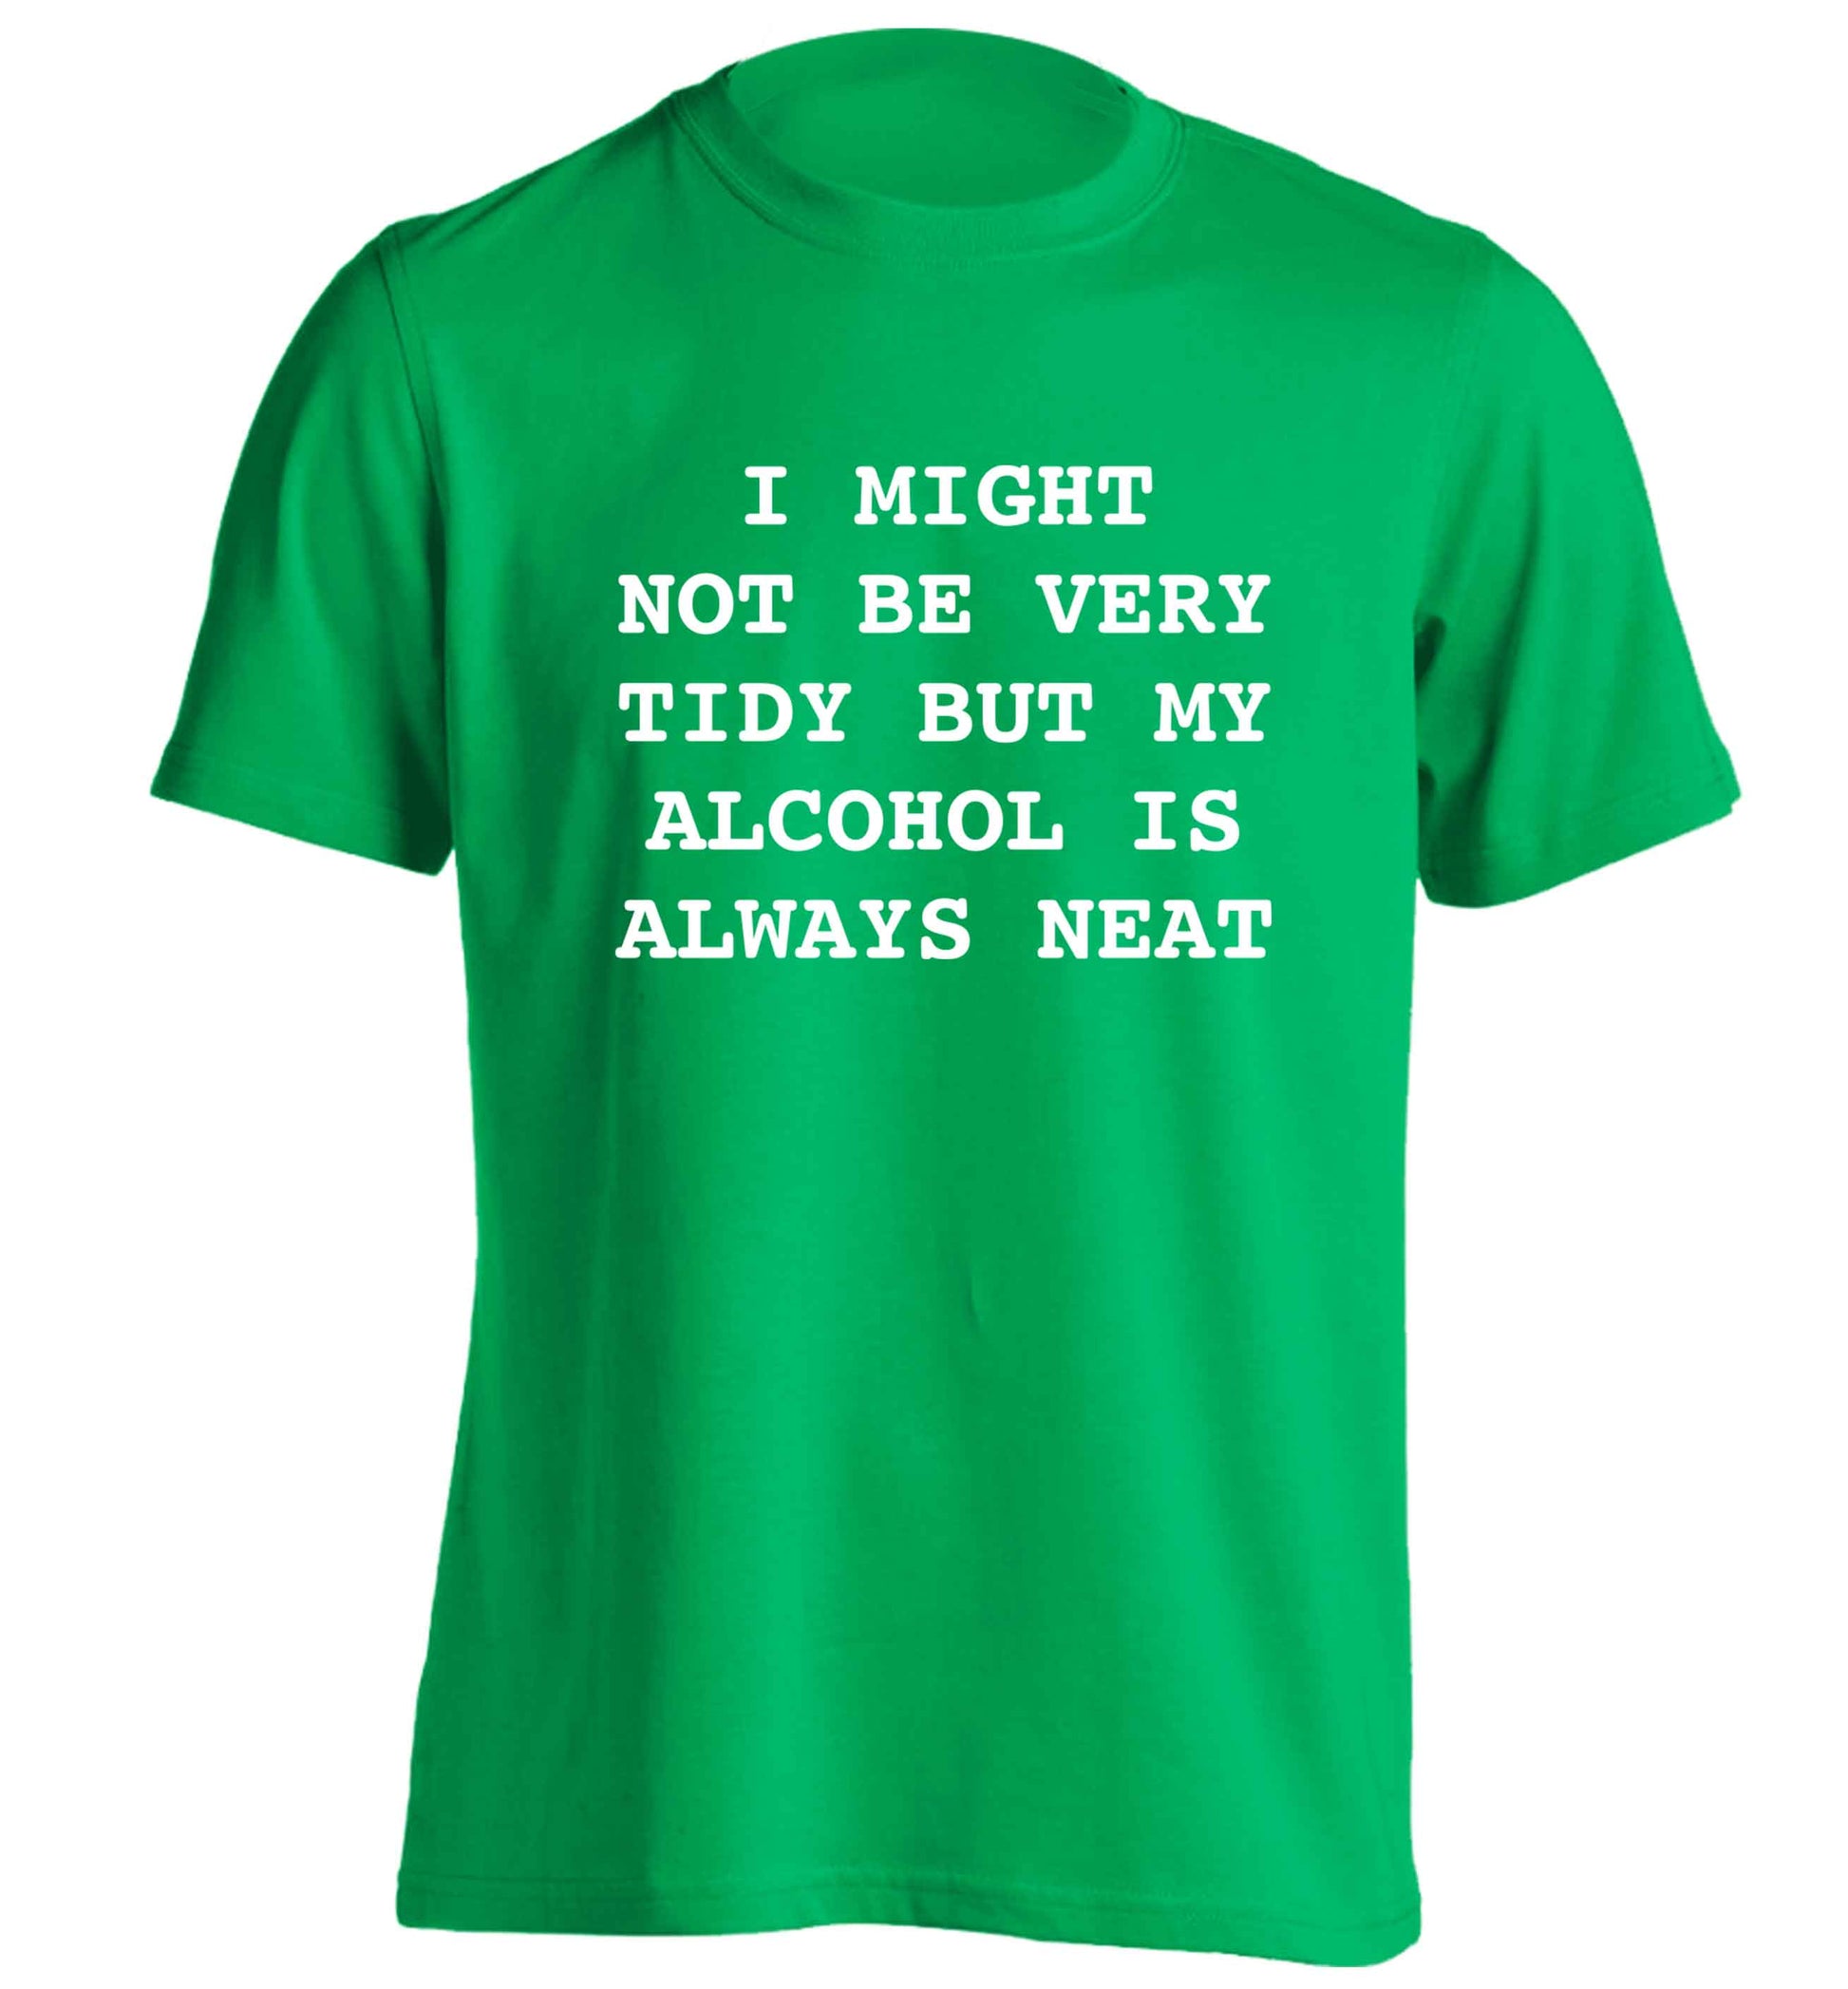 I might not be tidy but my alcohol is always neat adults unisex green Tshirt 2XL